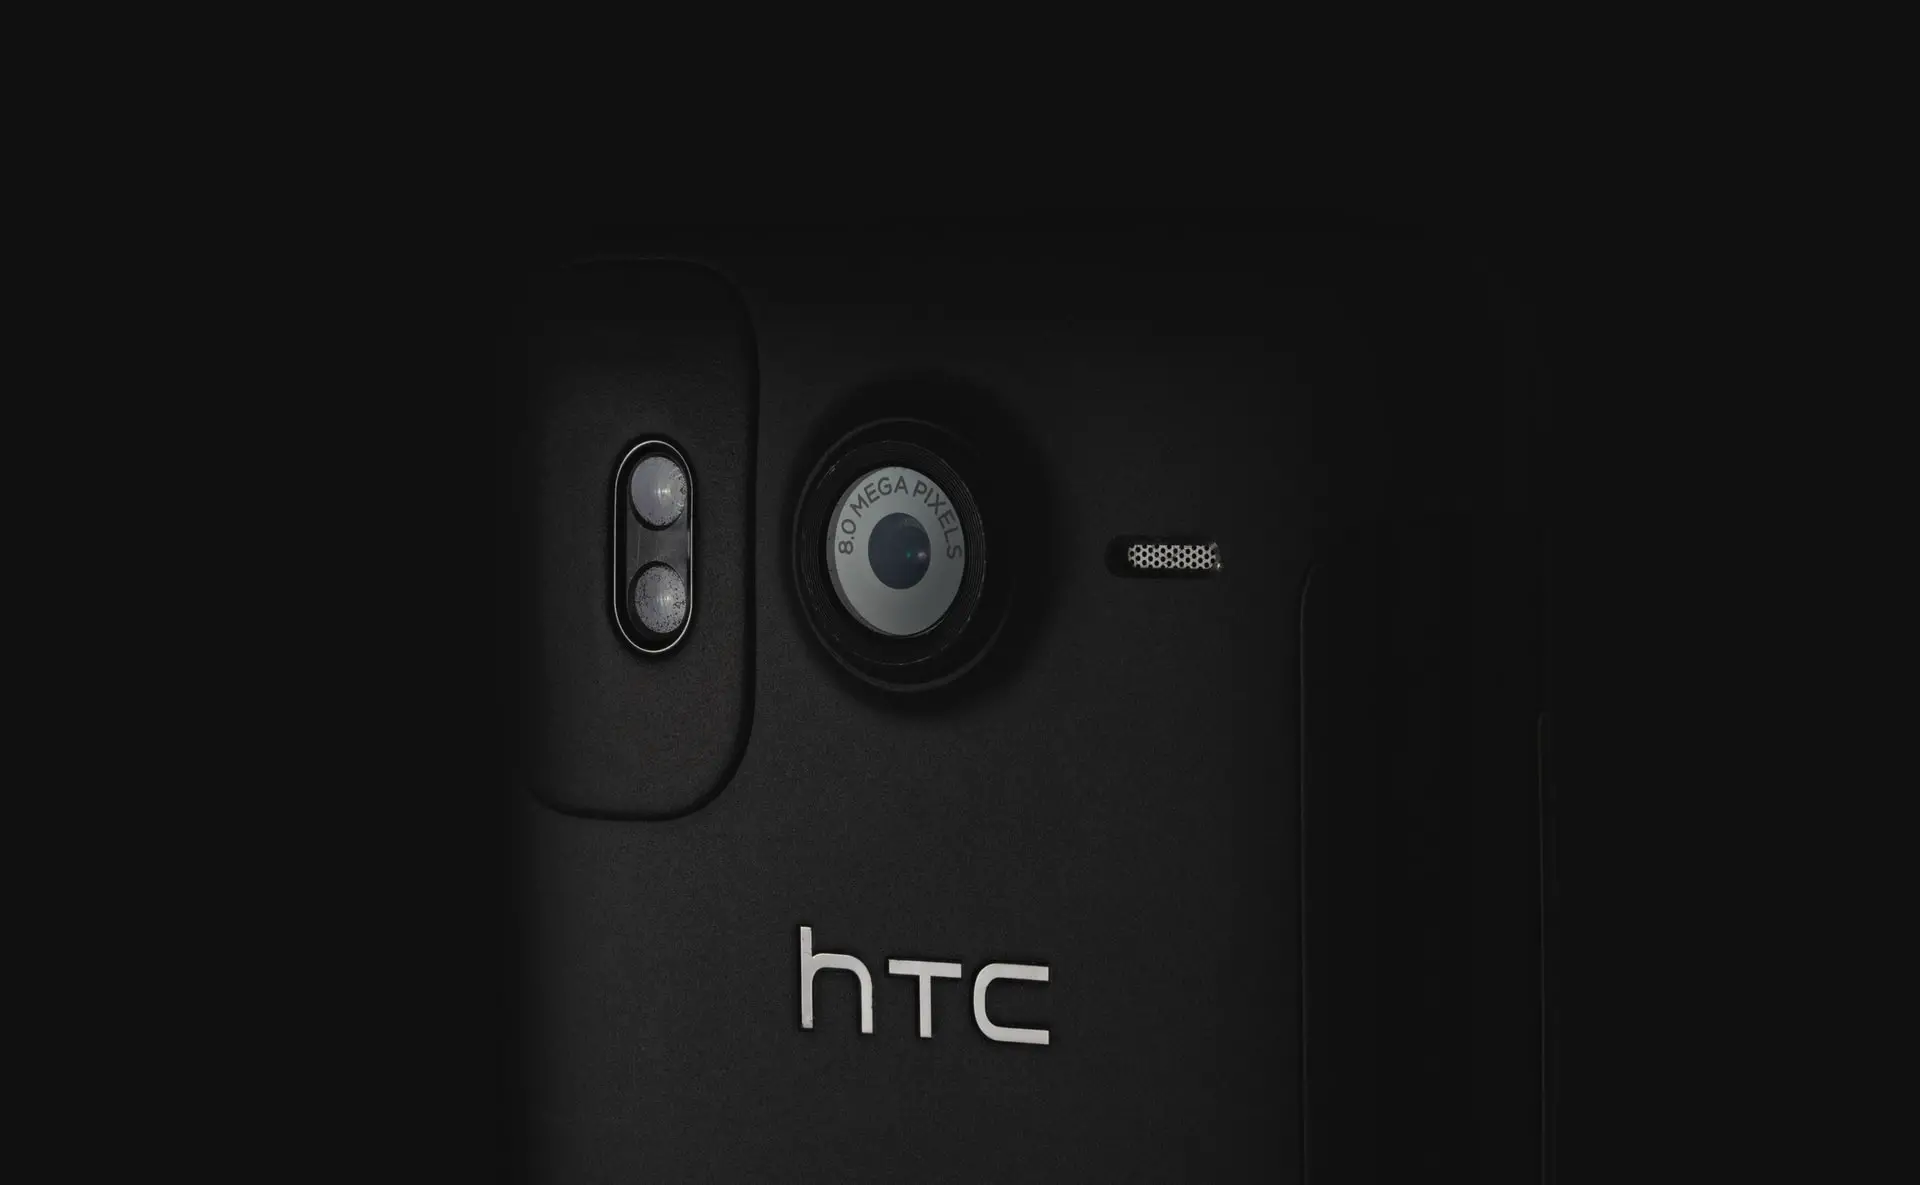 HTC Has a New Metaverse-centric Smartphone in the Works